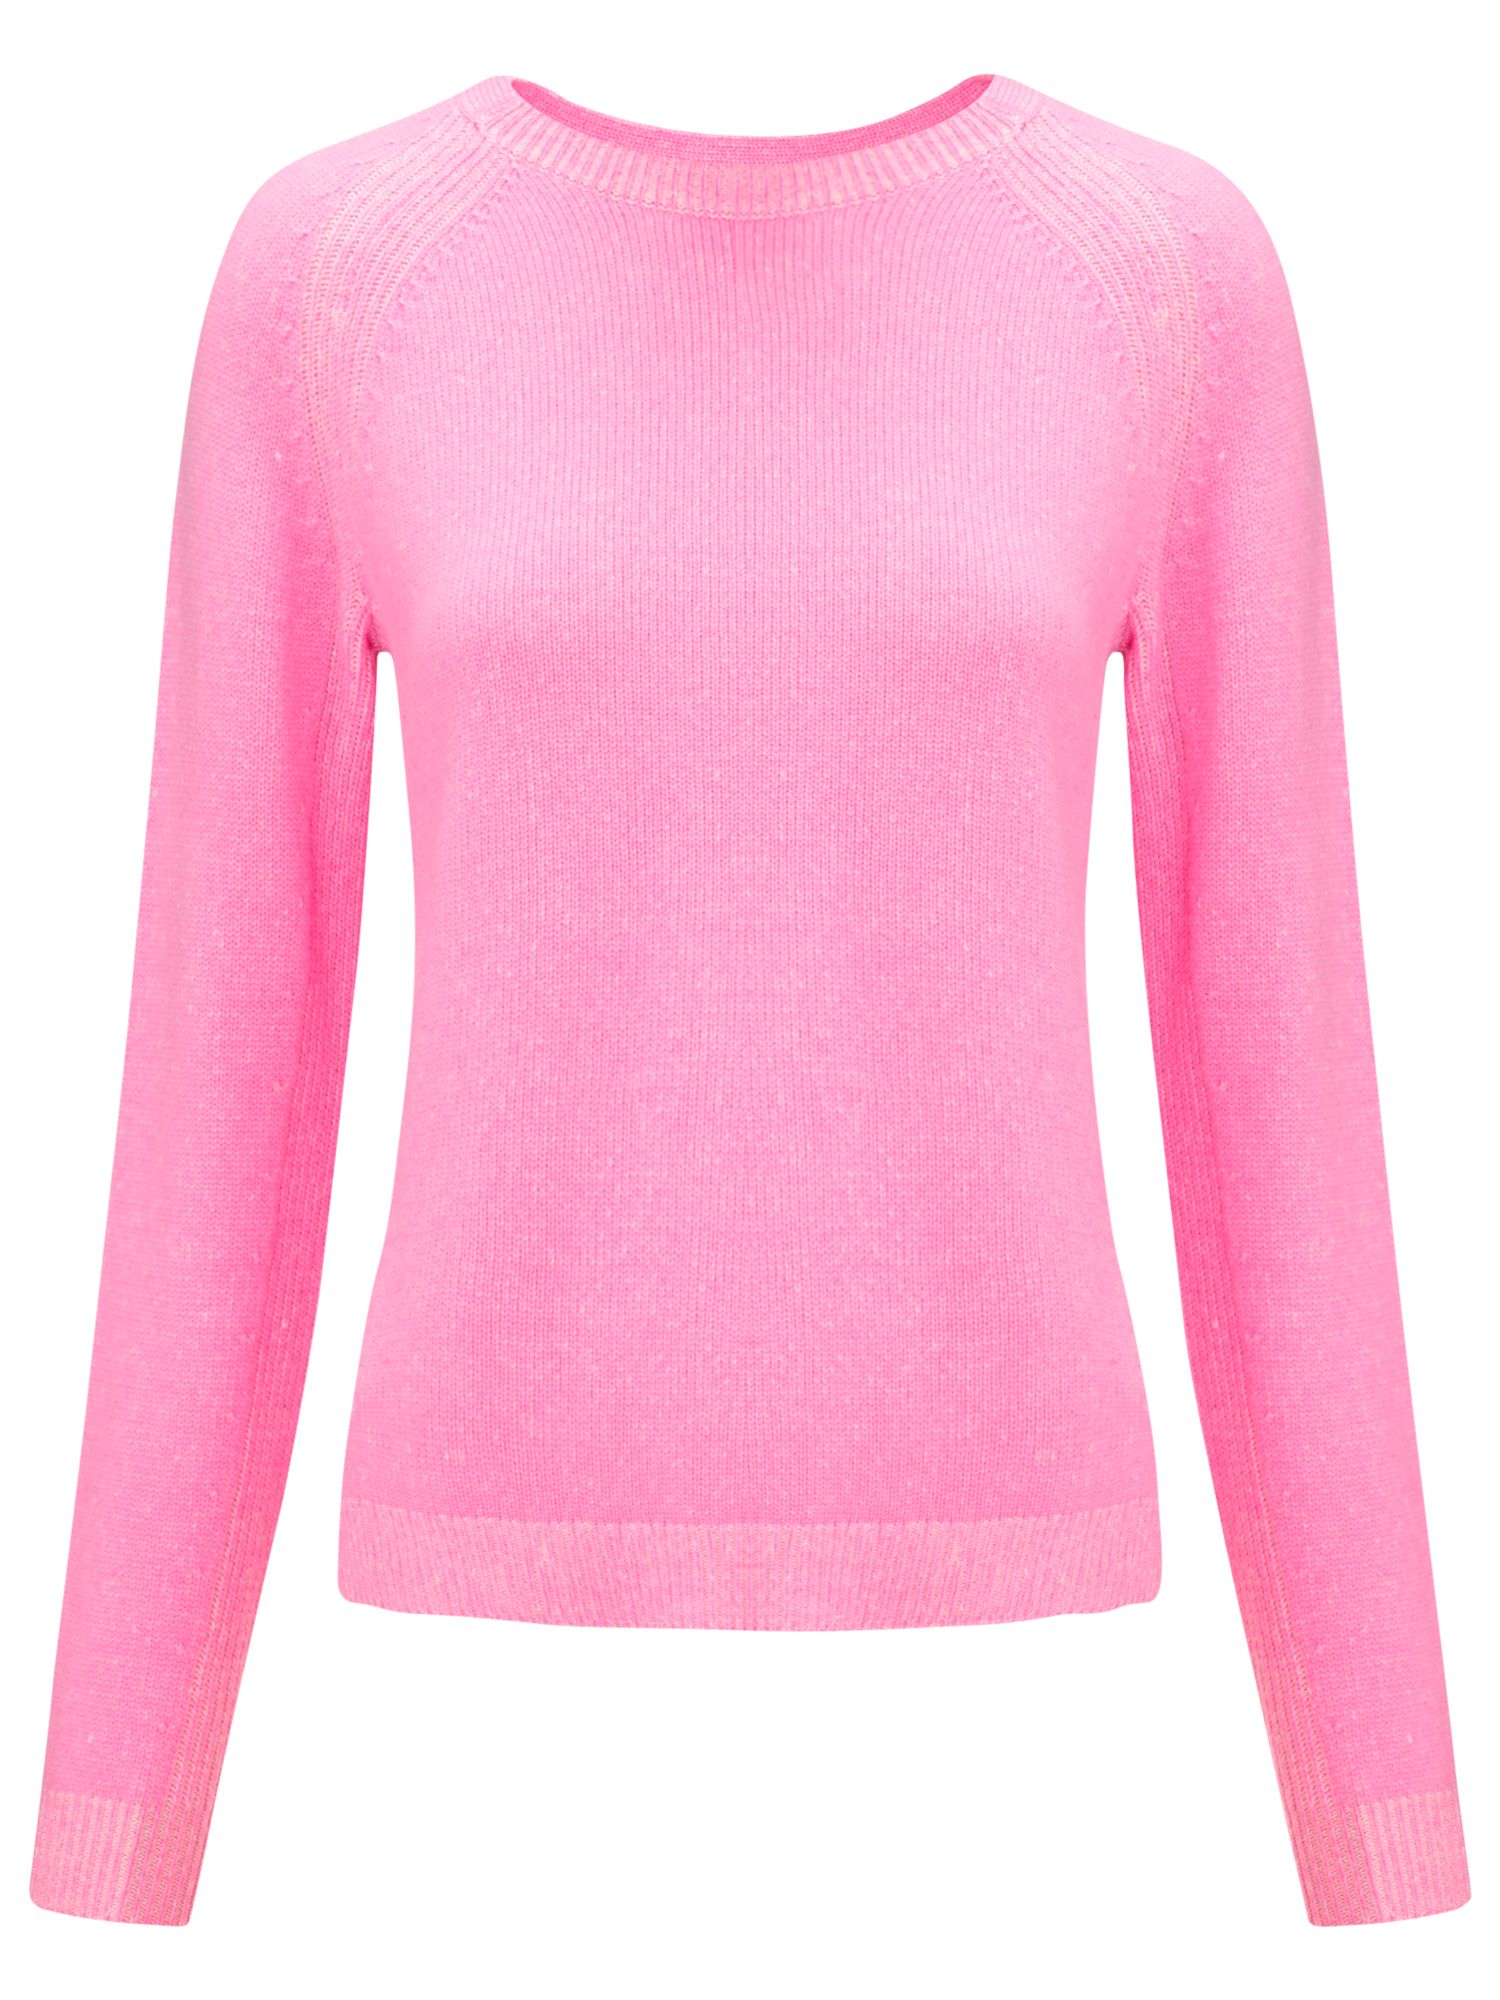 Buy Whistles Mimi Plaited Boxy Jumper, Pink Online at johnlewis.com